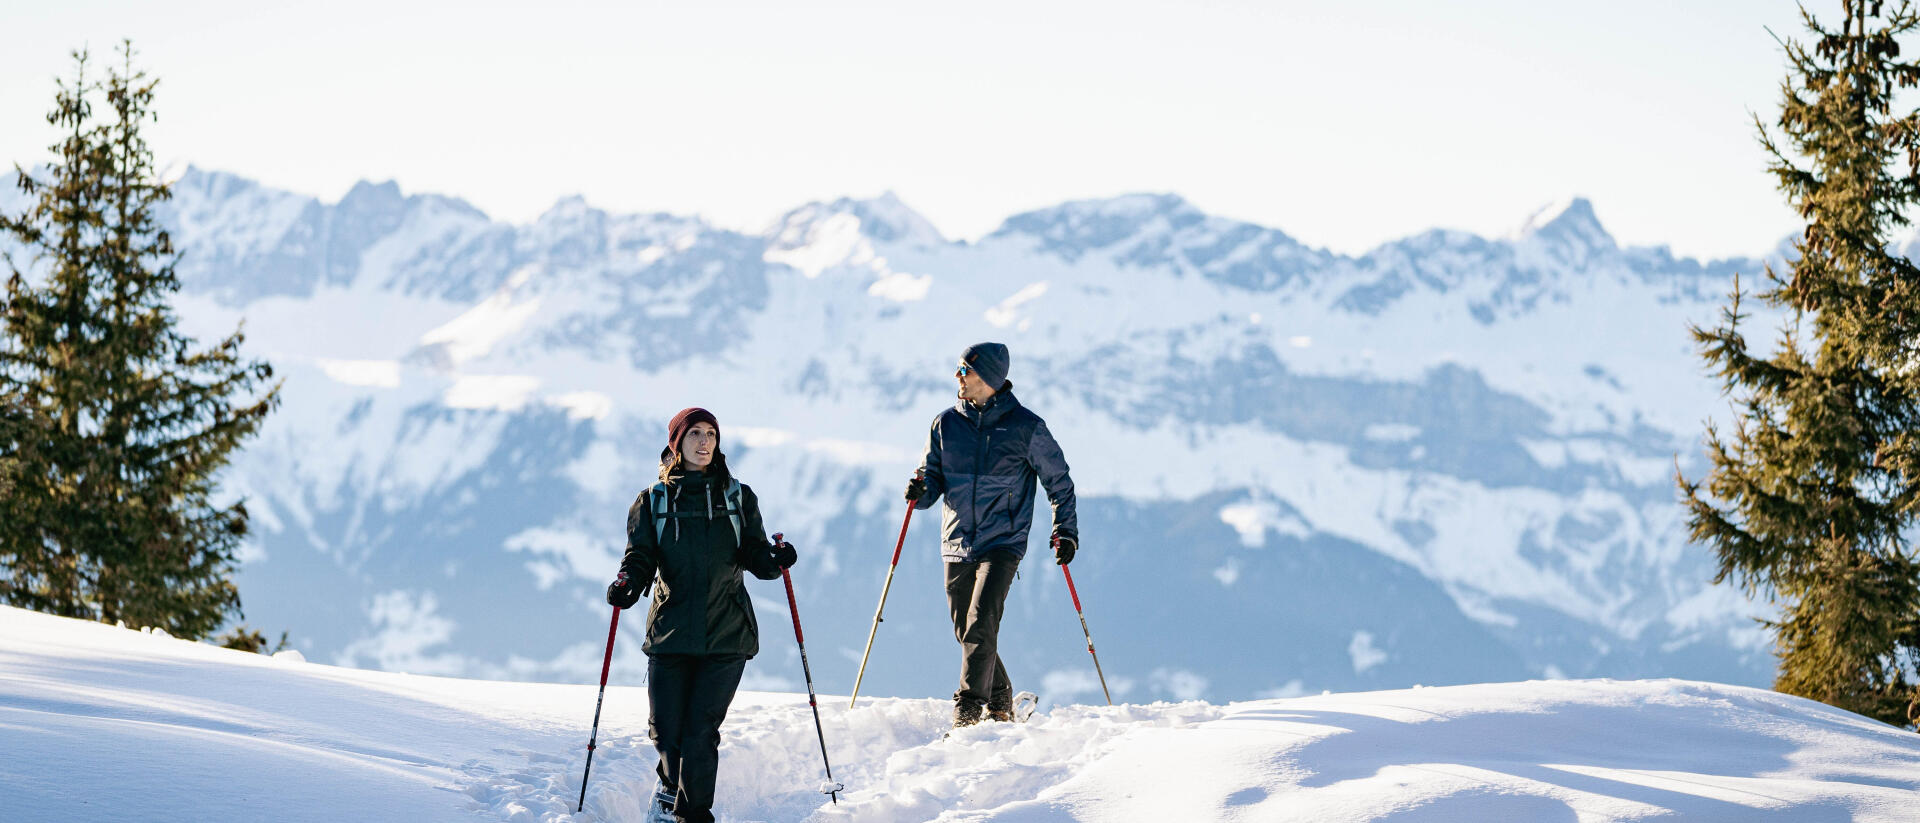 WINTER HIKING : CHOOSE THE RIGHT OUTFIT